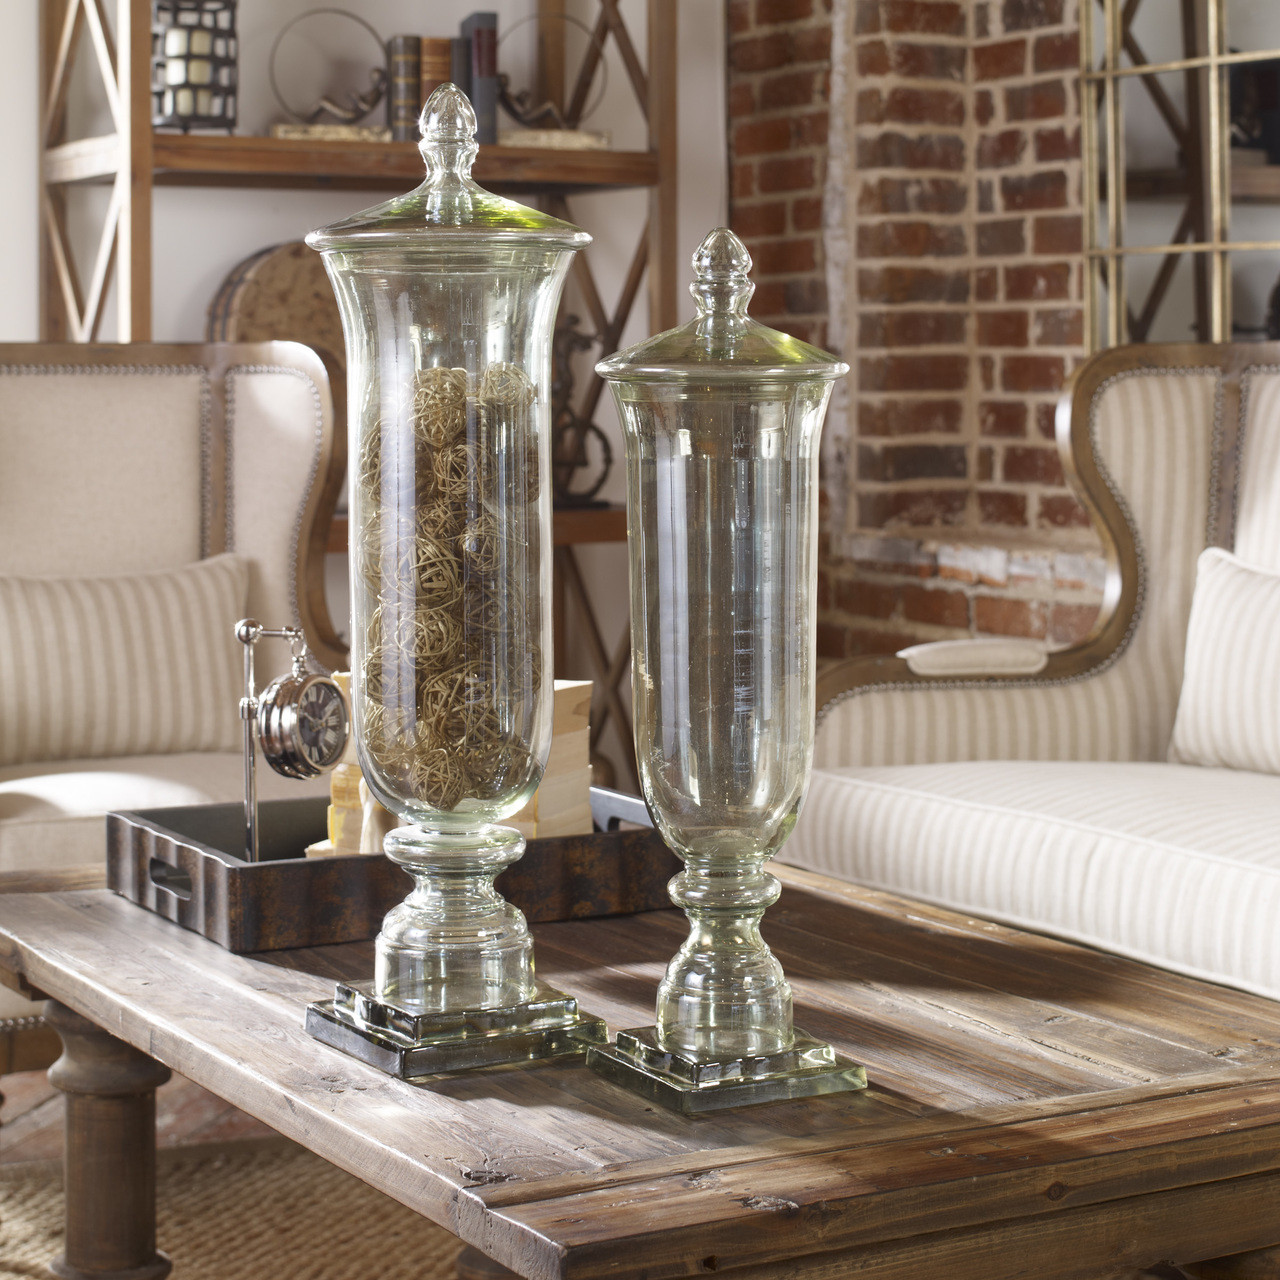 Uttermost Gilli Glass Decorative Containers, Set/2 in Canisters, Jars, Urns  at StudioLX